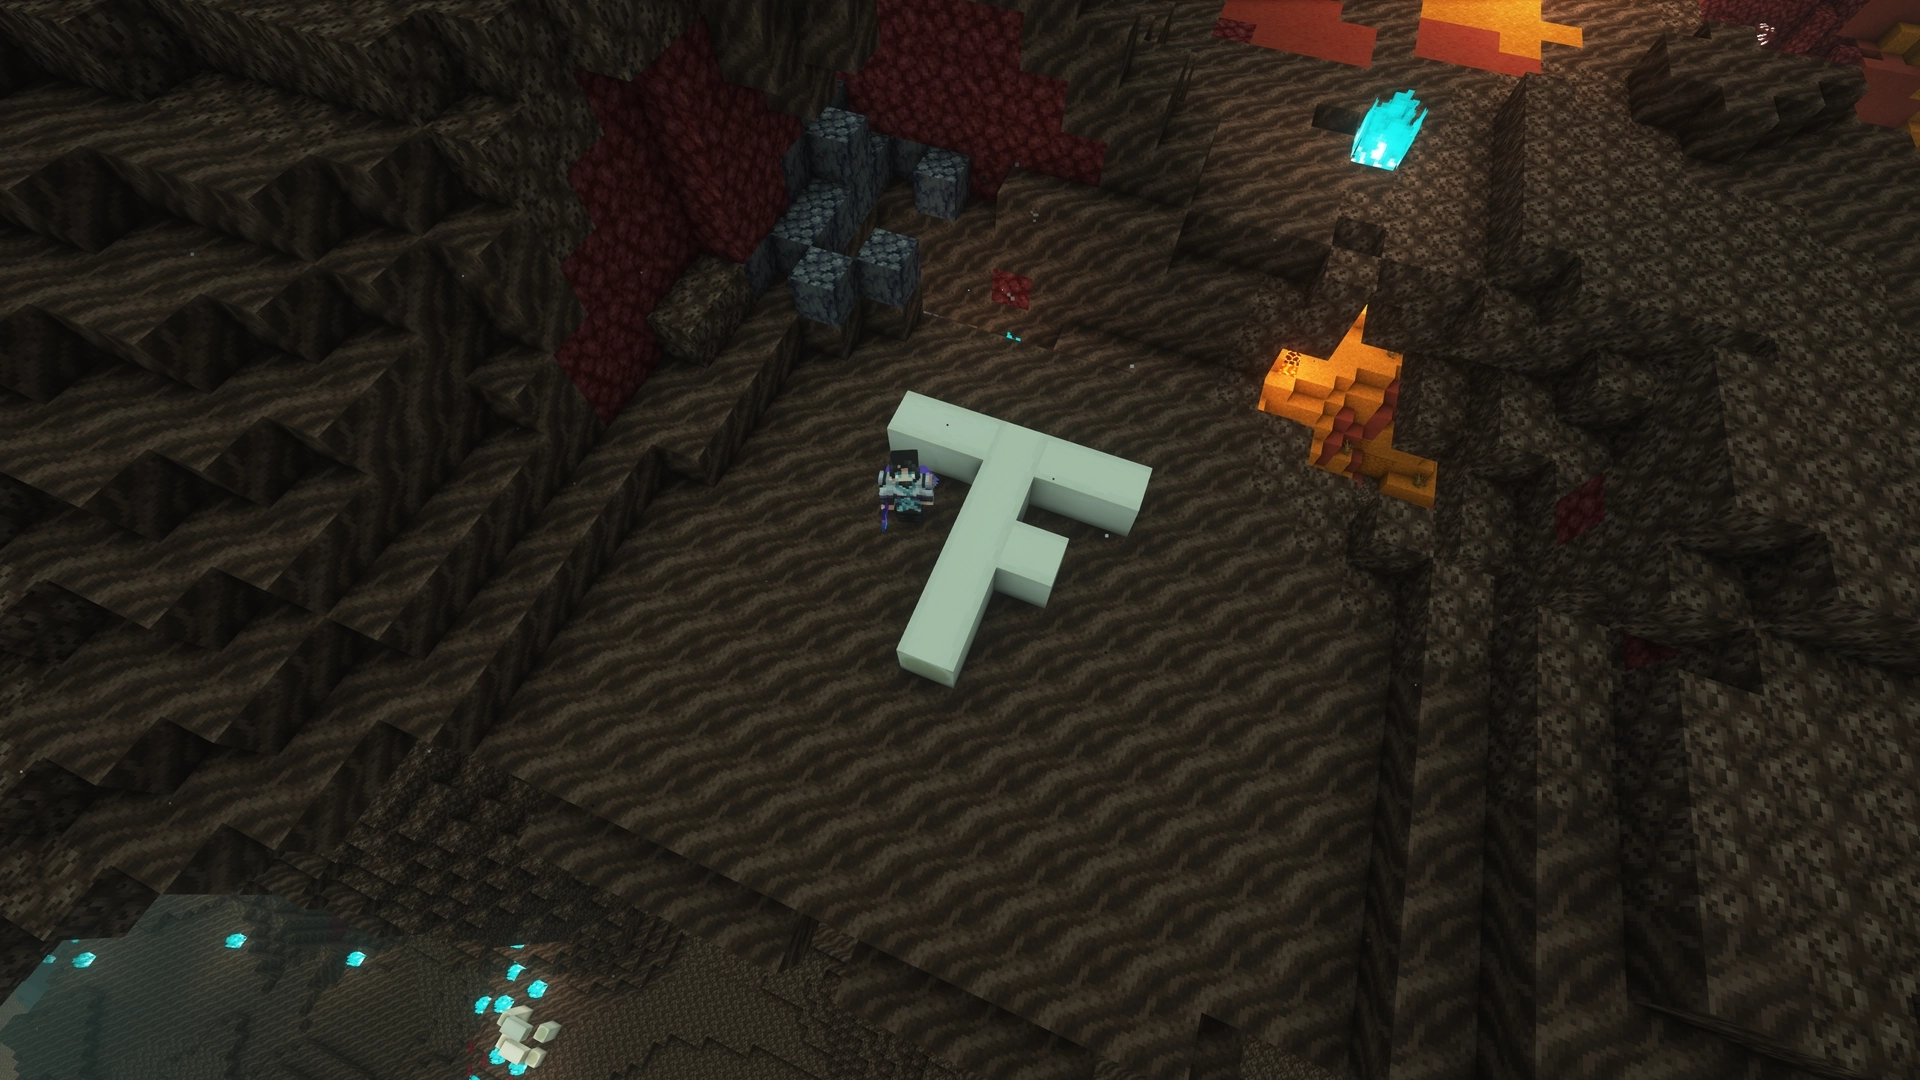 Would you believe it? Another FaZe logo in a soul sand valley